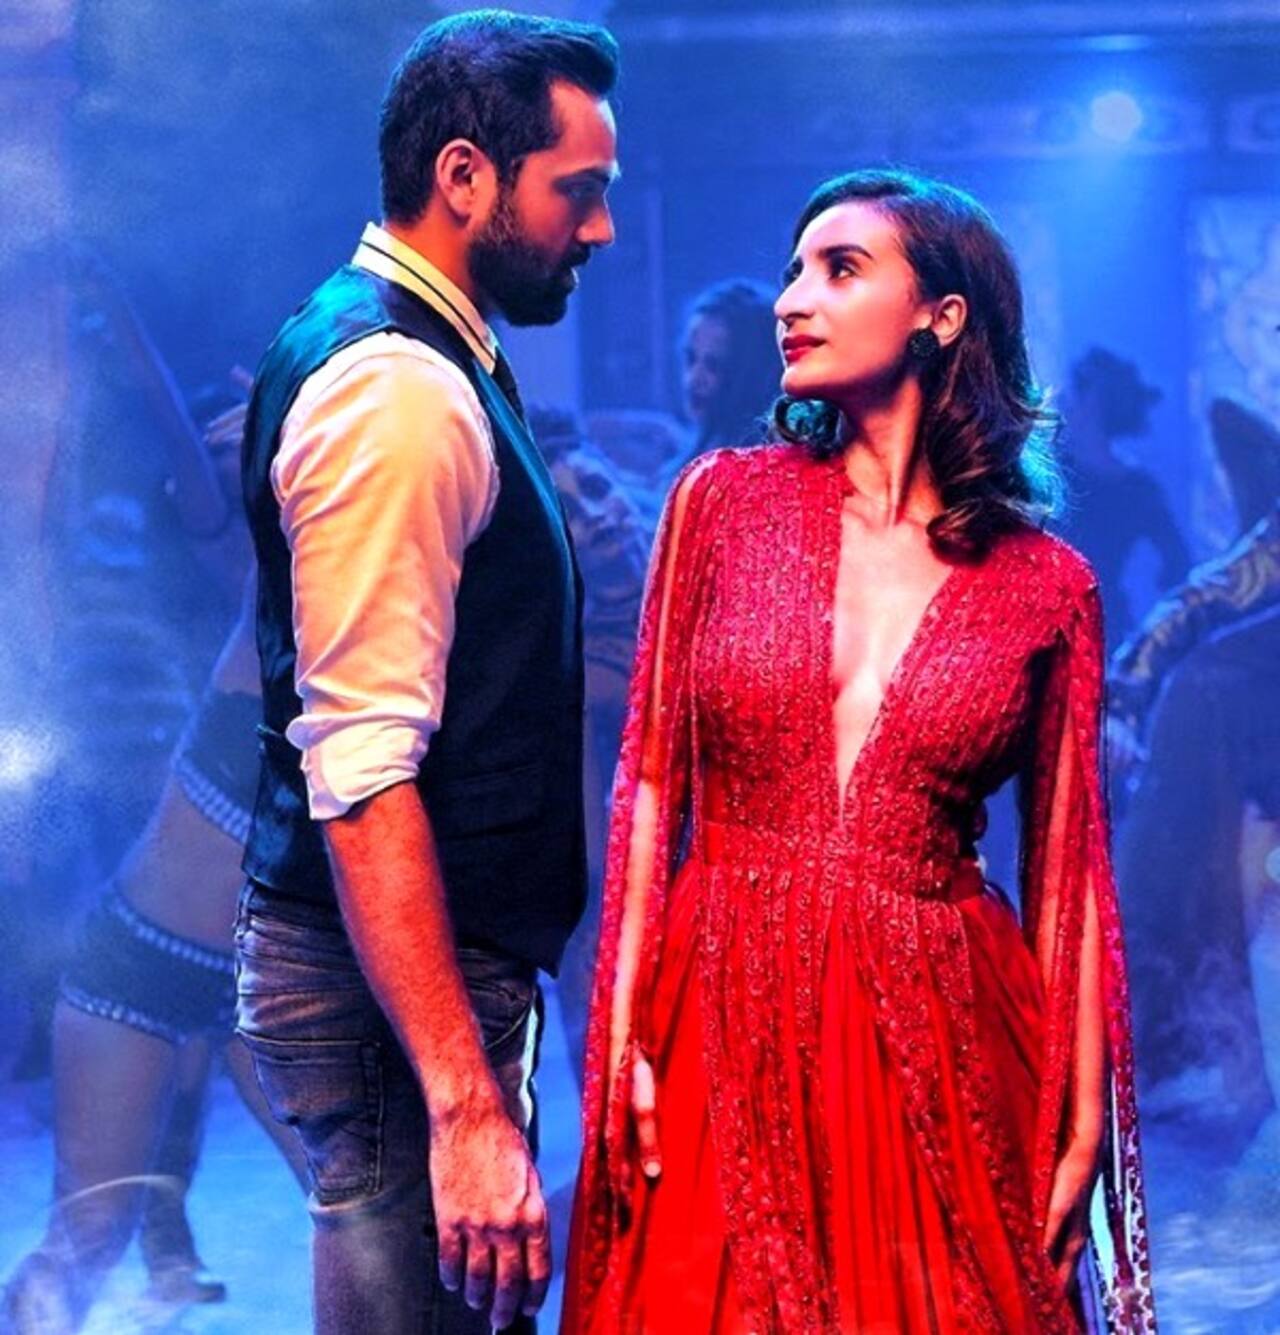 [Exclusive Video] Abhay Deol asks Patralekhaa if she wants to see him naked and here's what happens next